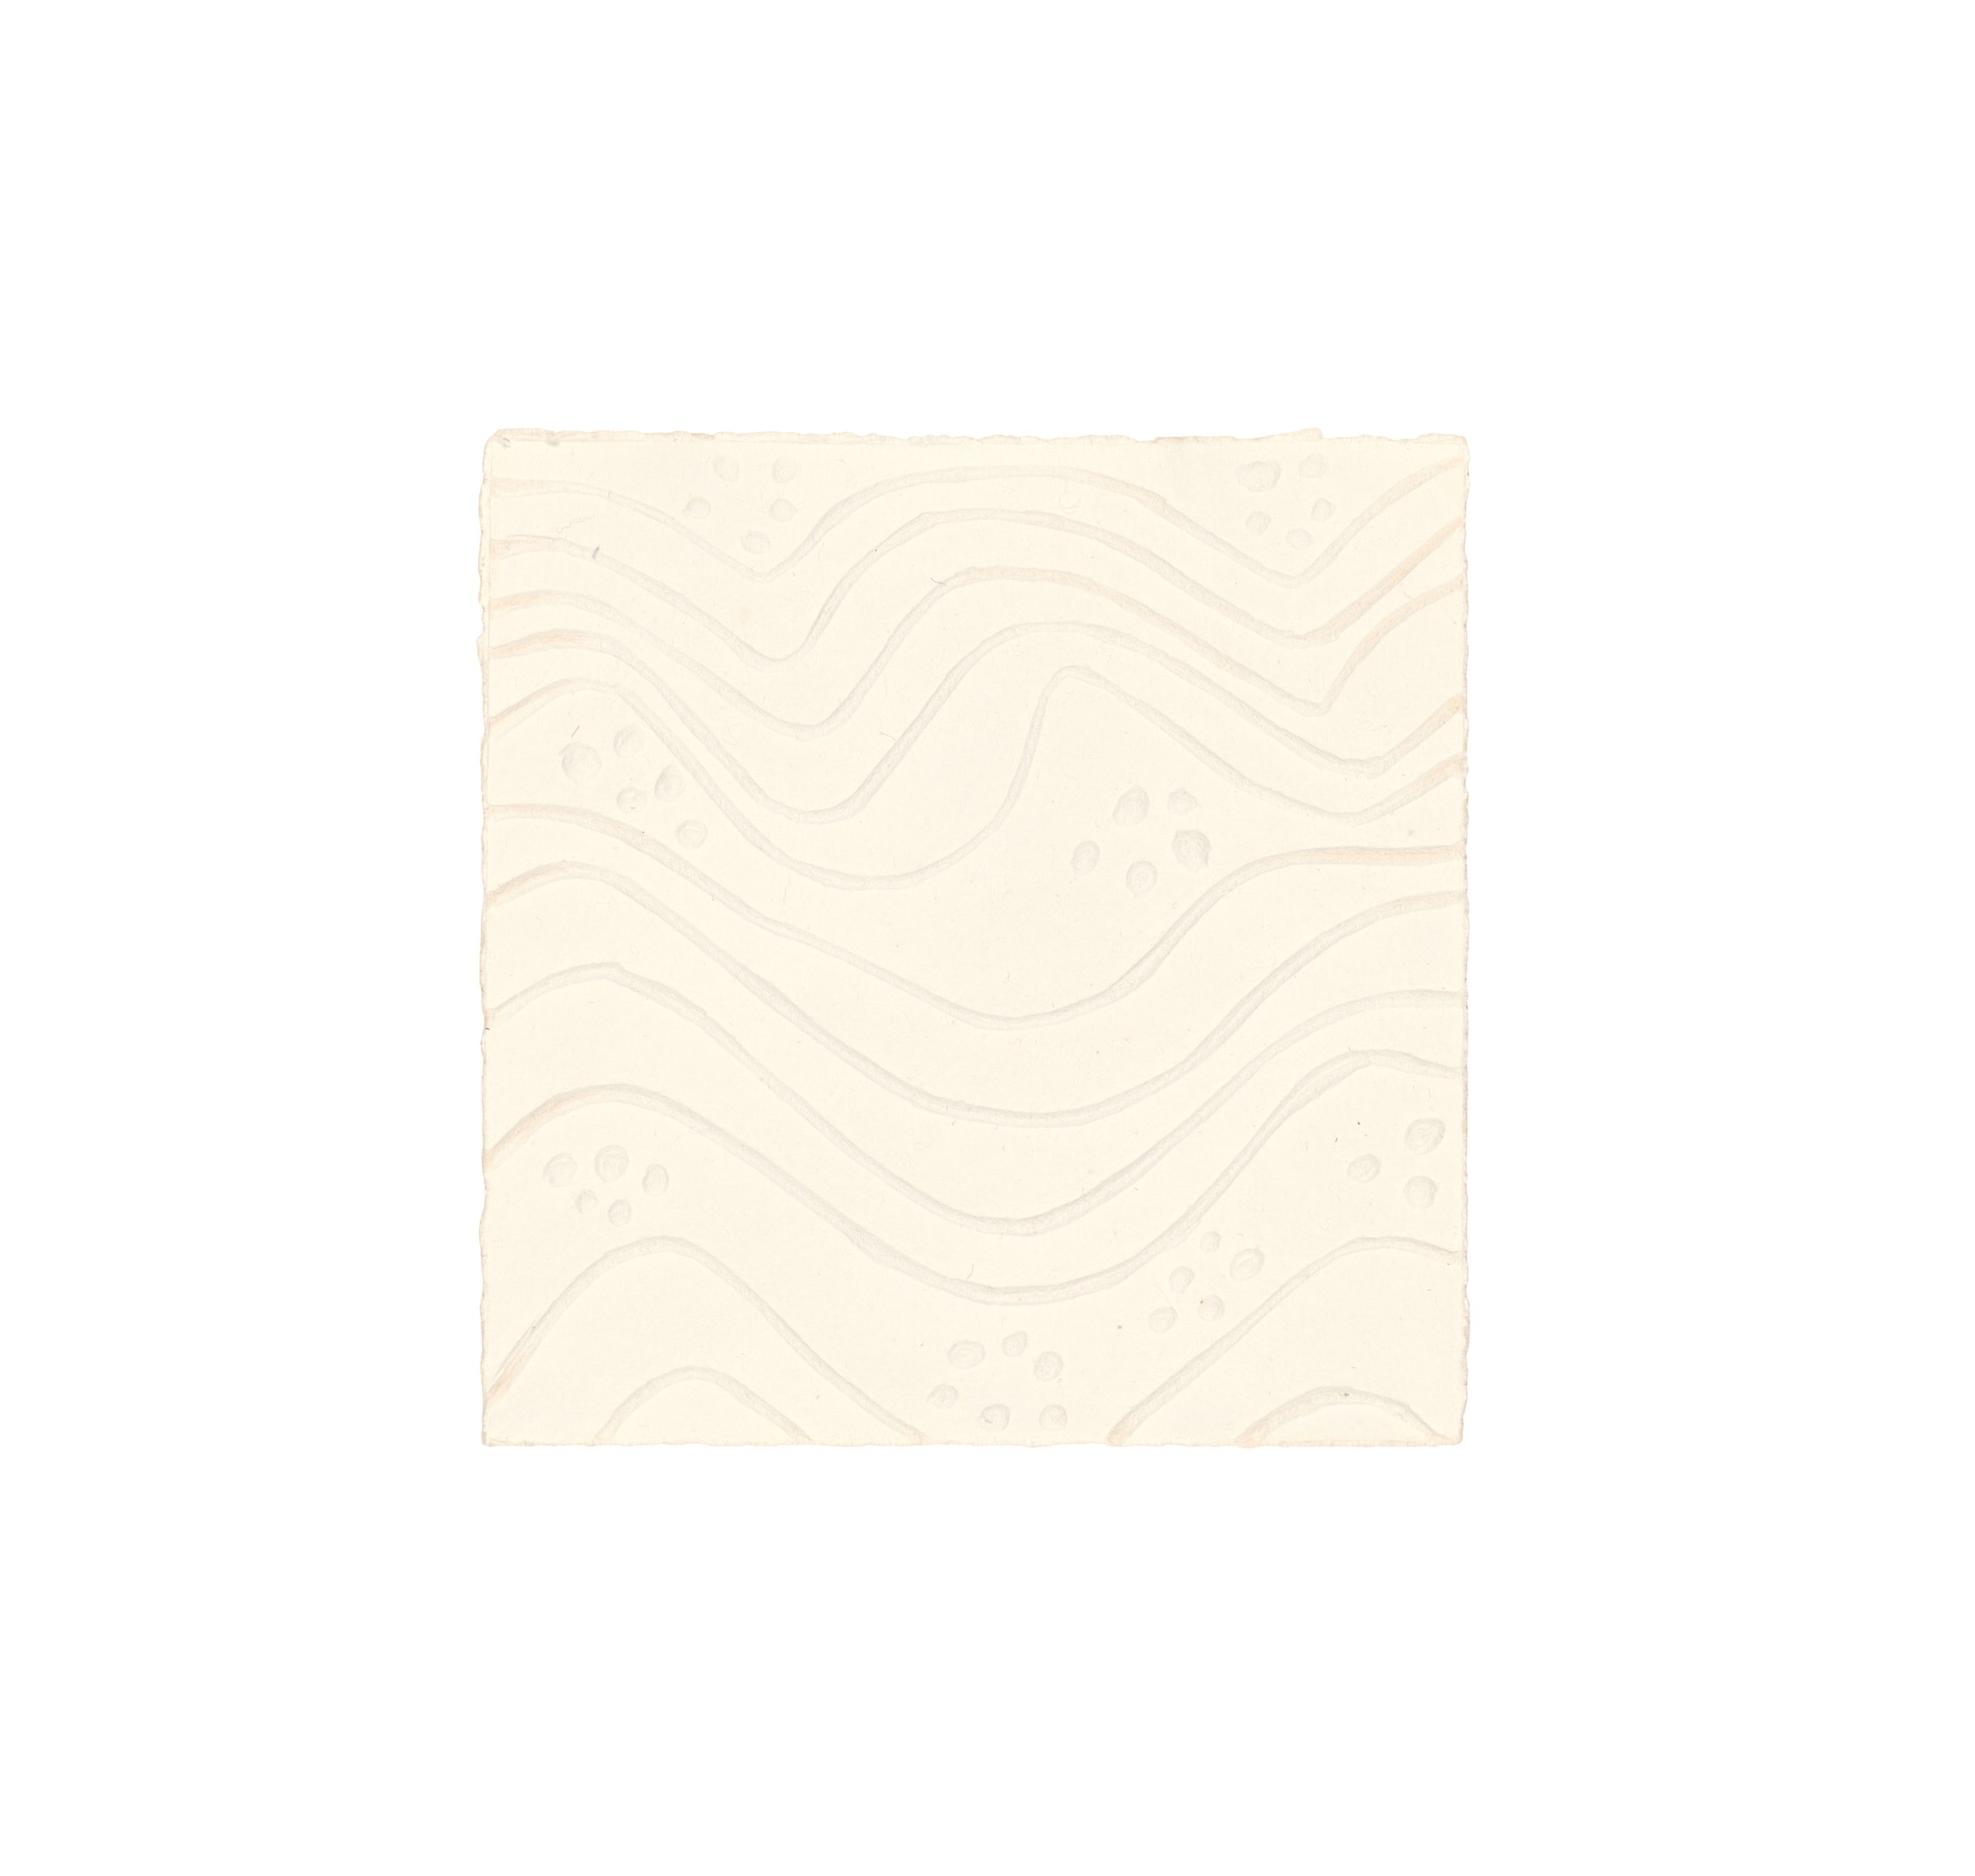 Embossed paper by Euraba Paper Company